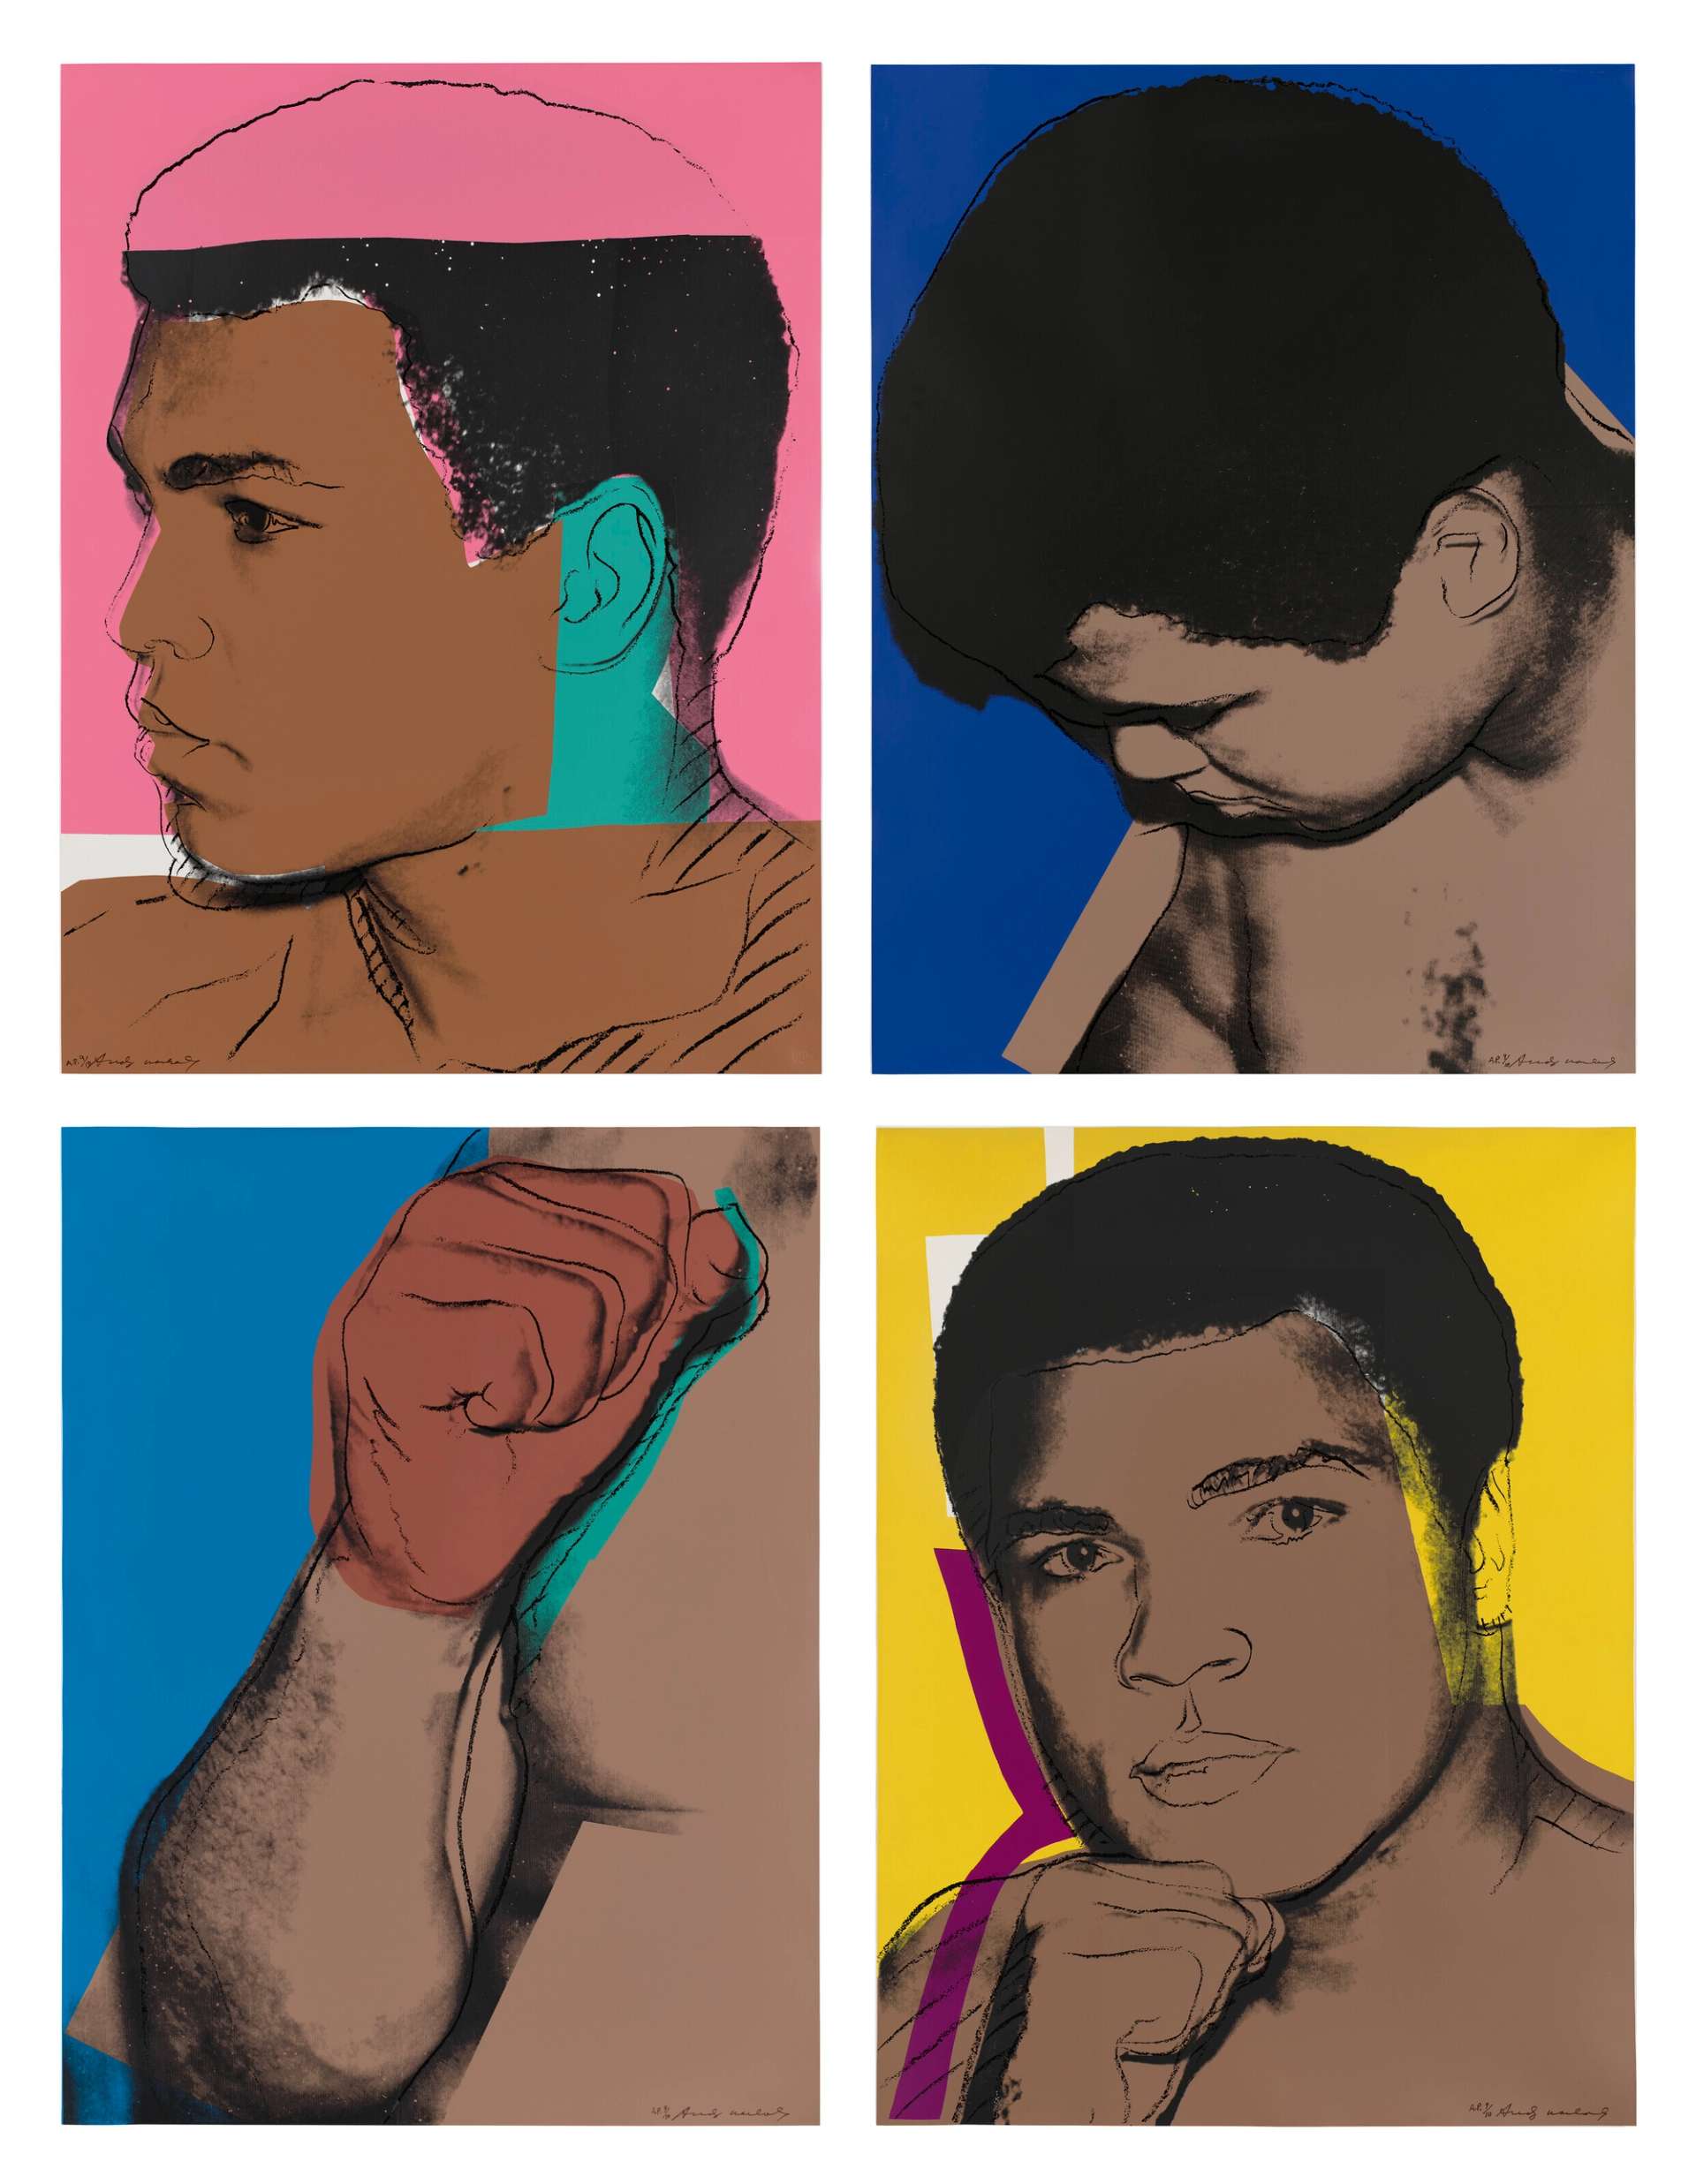 10 Facts About Andy Warhol's Muhammad Ali 